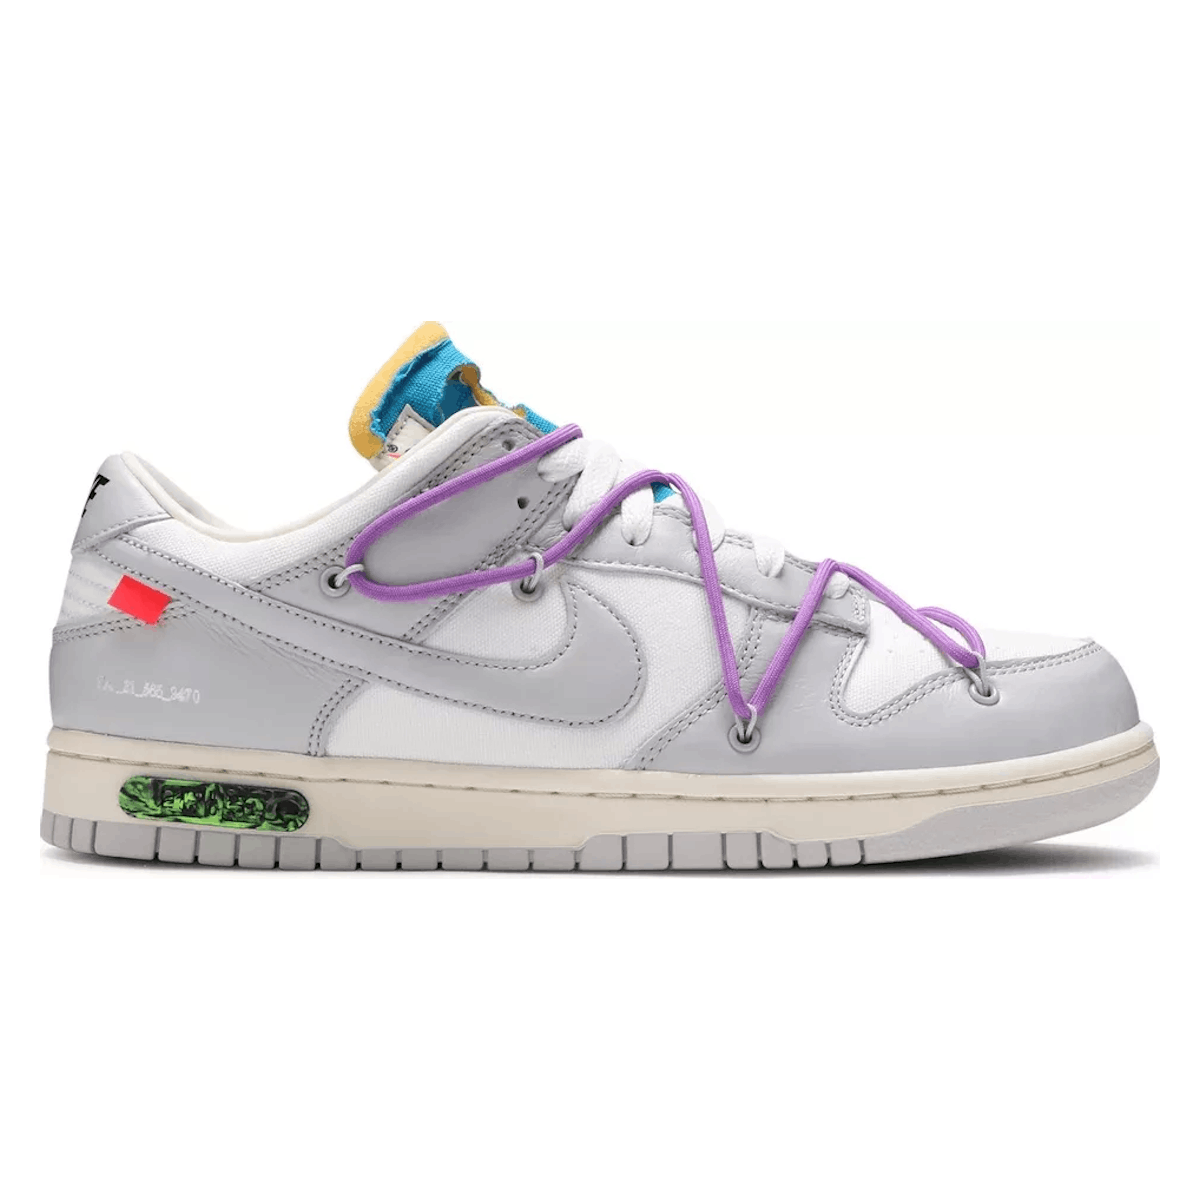 Off-White x Nike Dunk Low "Lot 47 of 50"